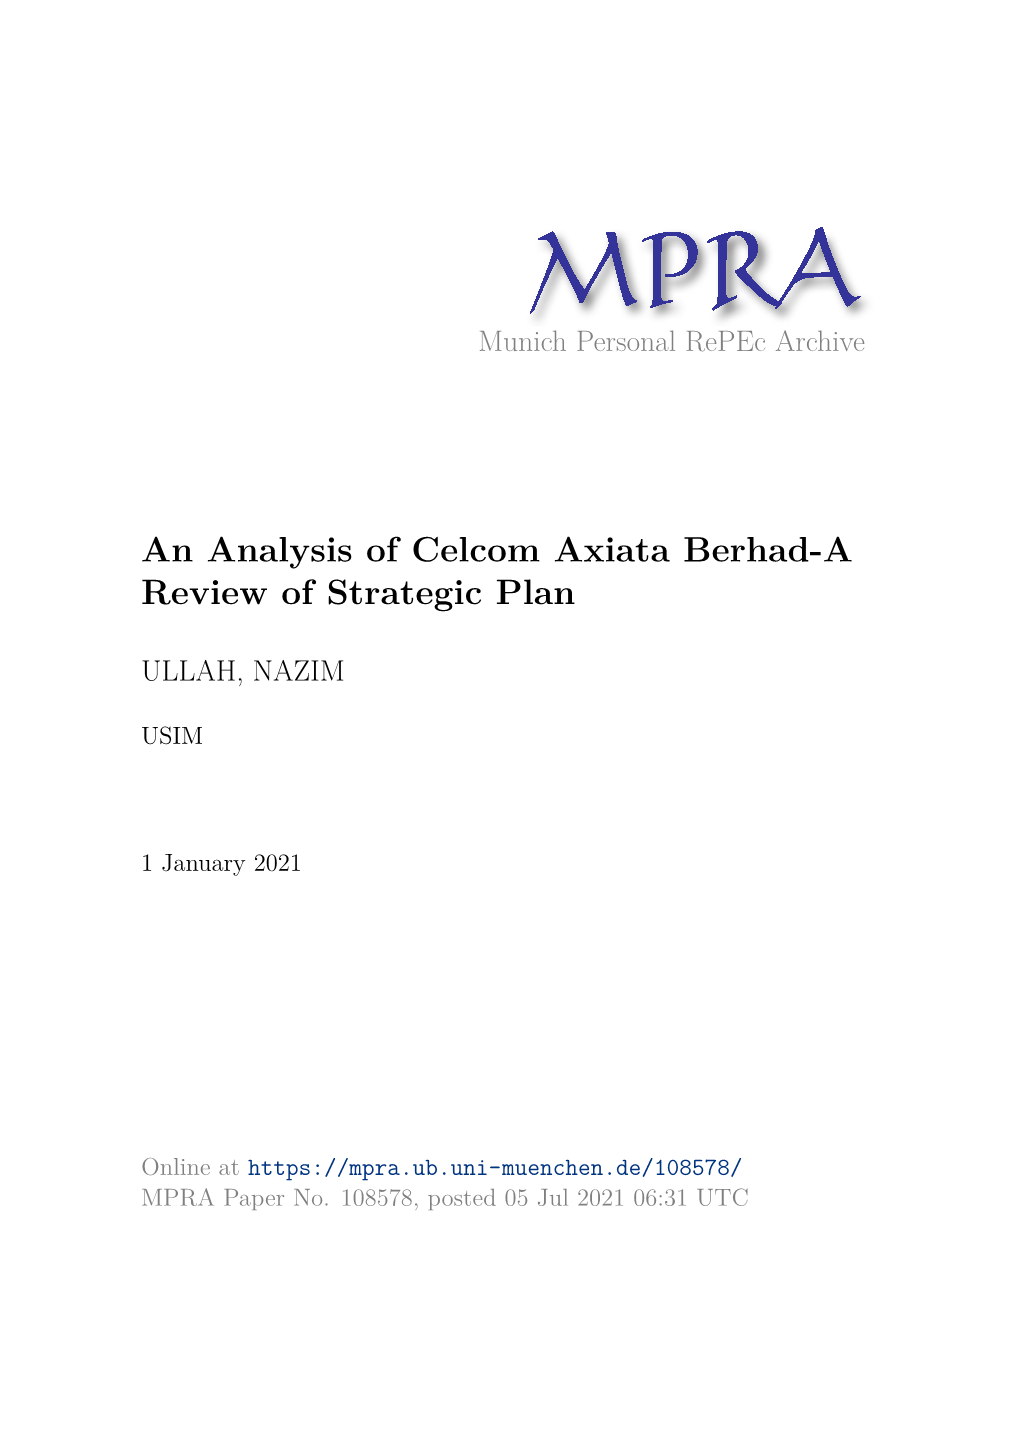 An Analysis of Celcom Axiata Berhad-A Review of Strategic Plan